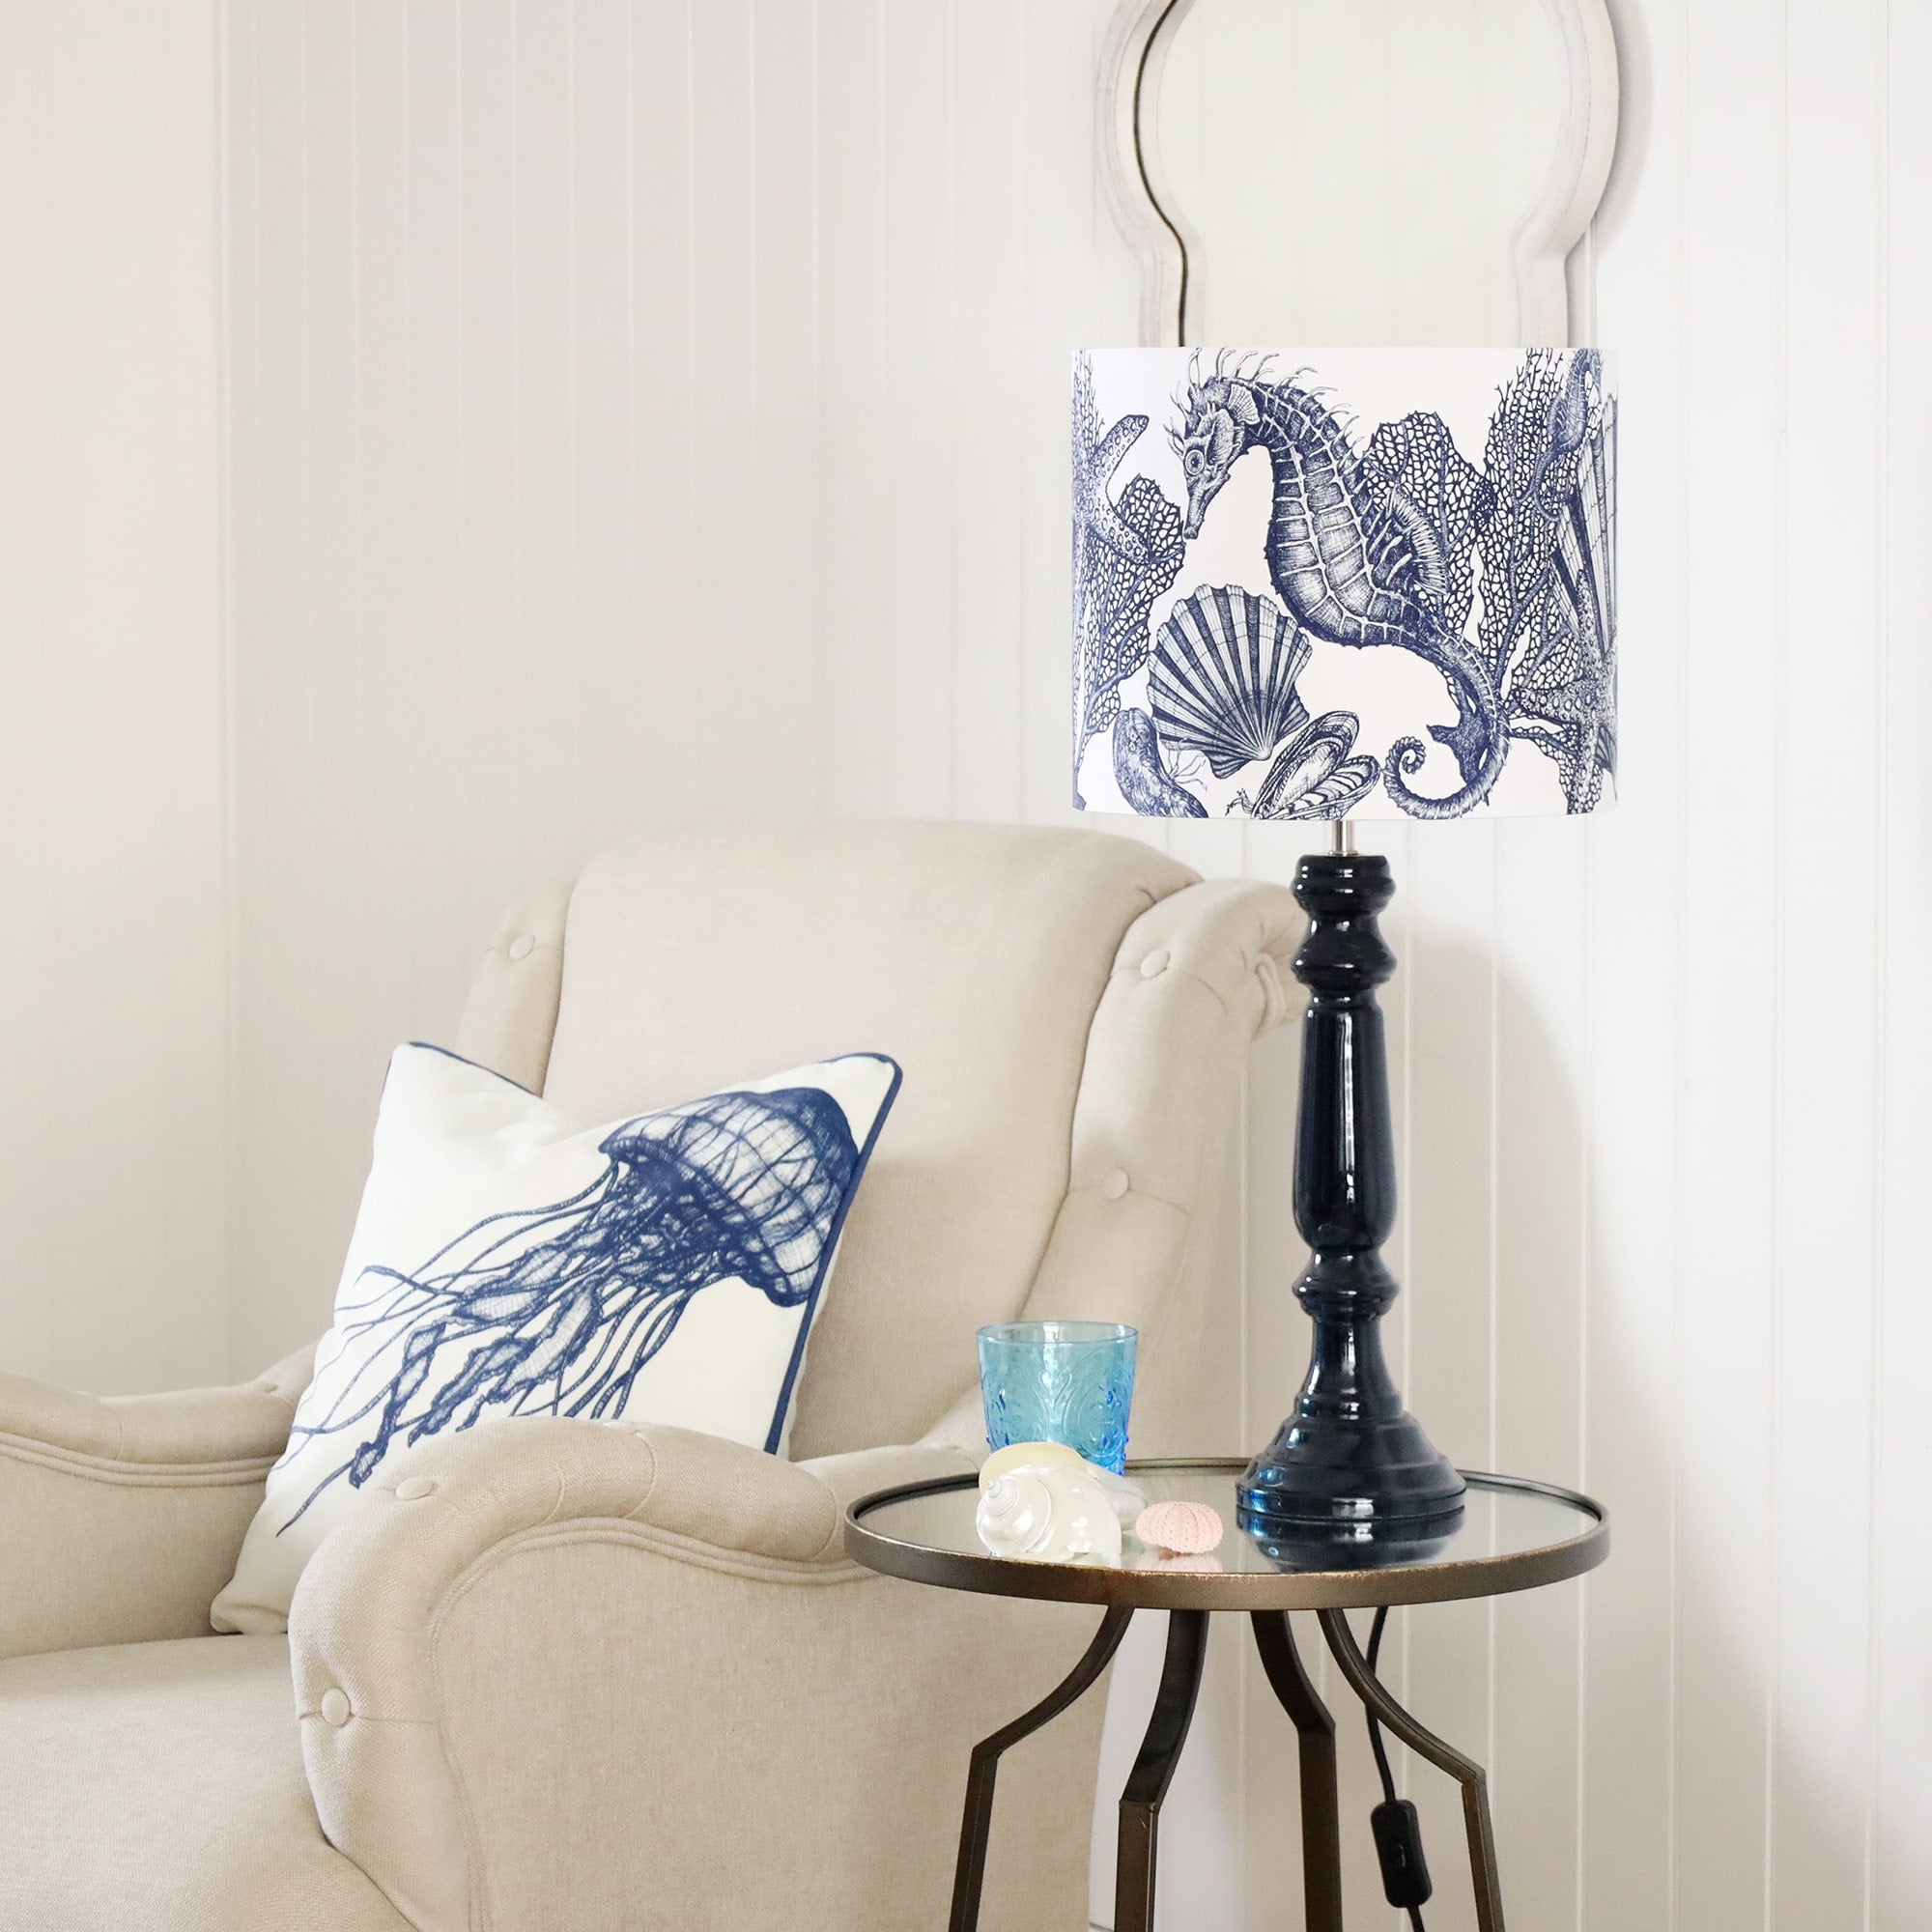 Navy Lacquer Zennor lamp base with a seahorse lampshade on a mirror table.On the table is a glass with some shells placed on it.Next to the table is a chair with an jellyfish cushion.Behind on the wall is a wave mirror.